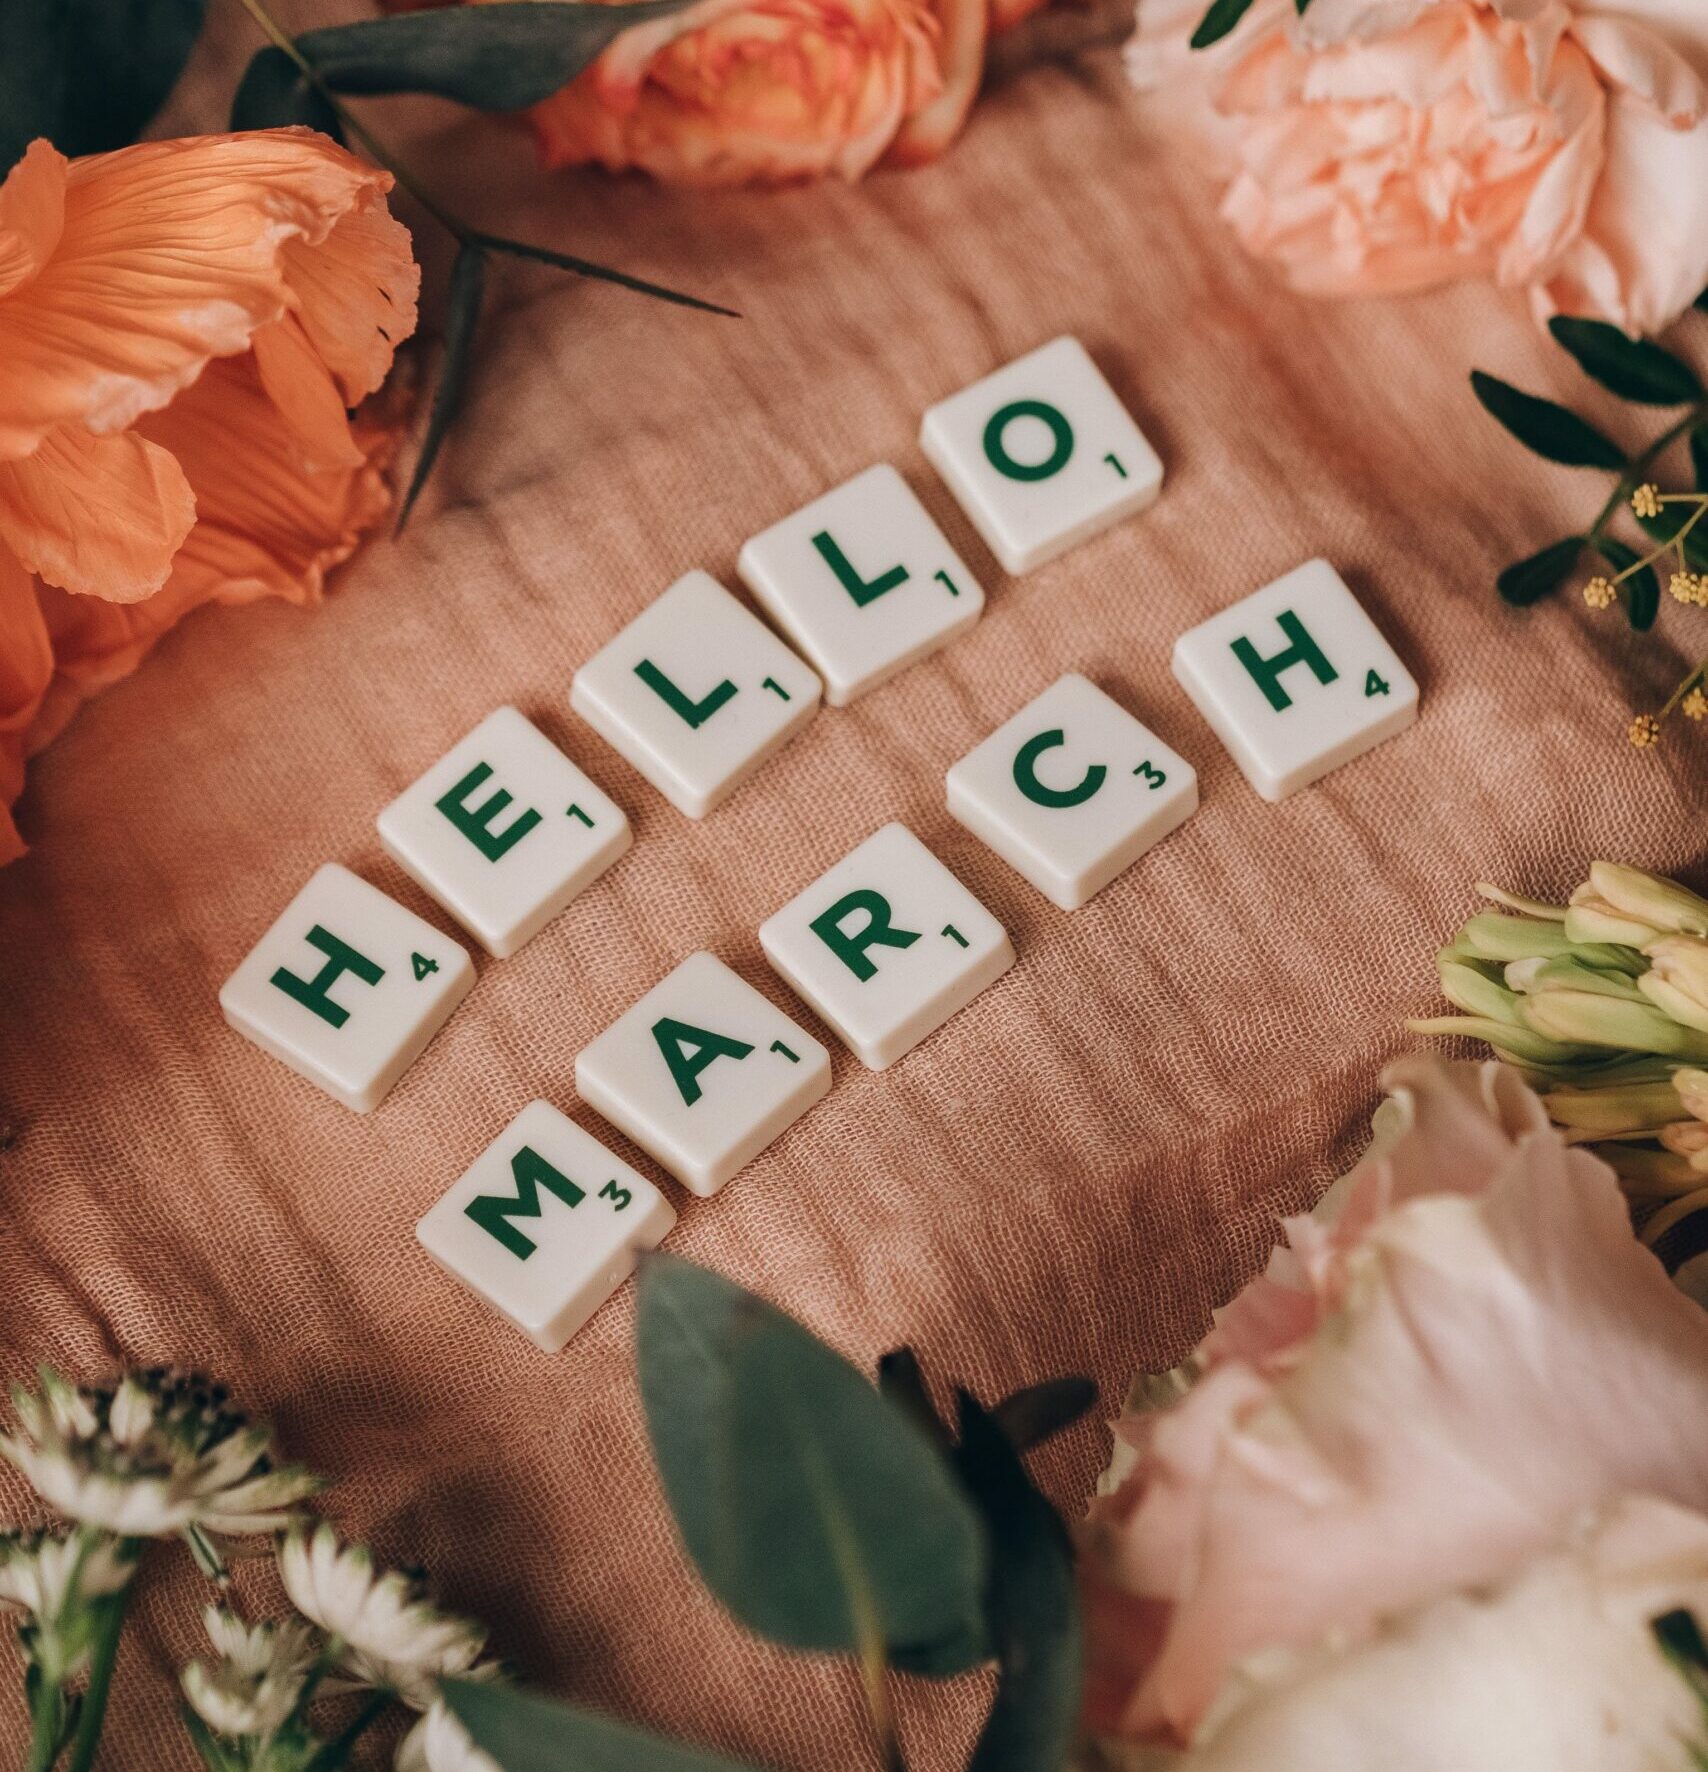 Image of march time scrabble letters to promote the new month